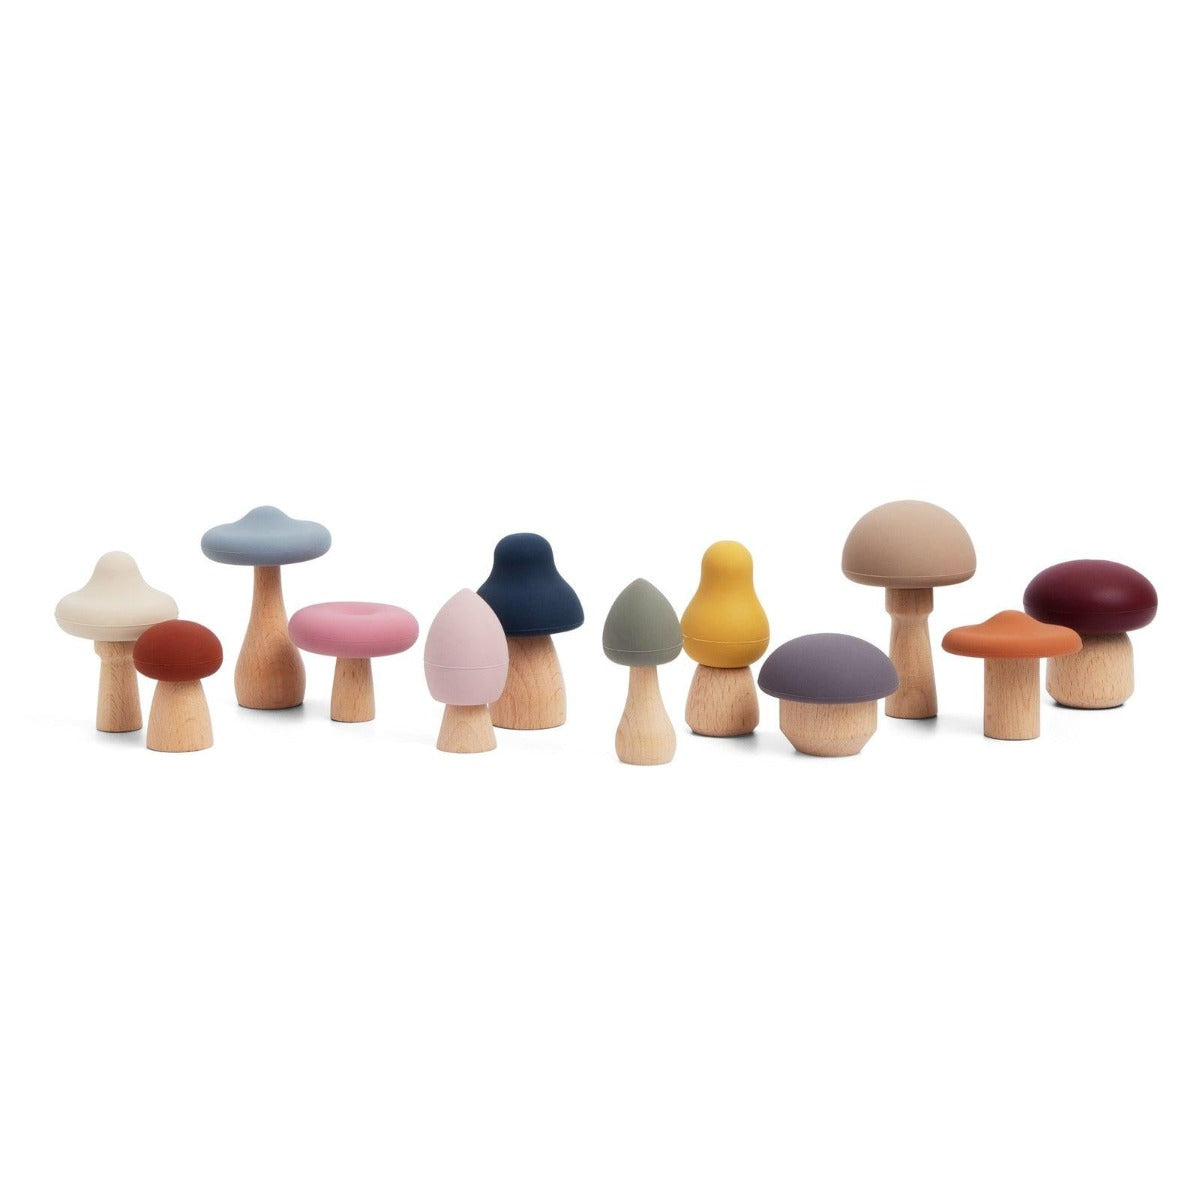 Maison Rue silicone & wooden sorting shrooms toy set 12 pieces multicolor